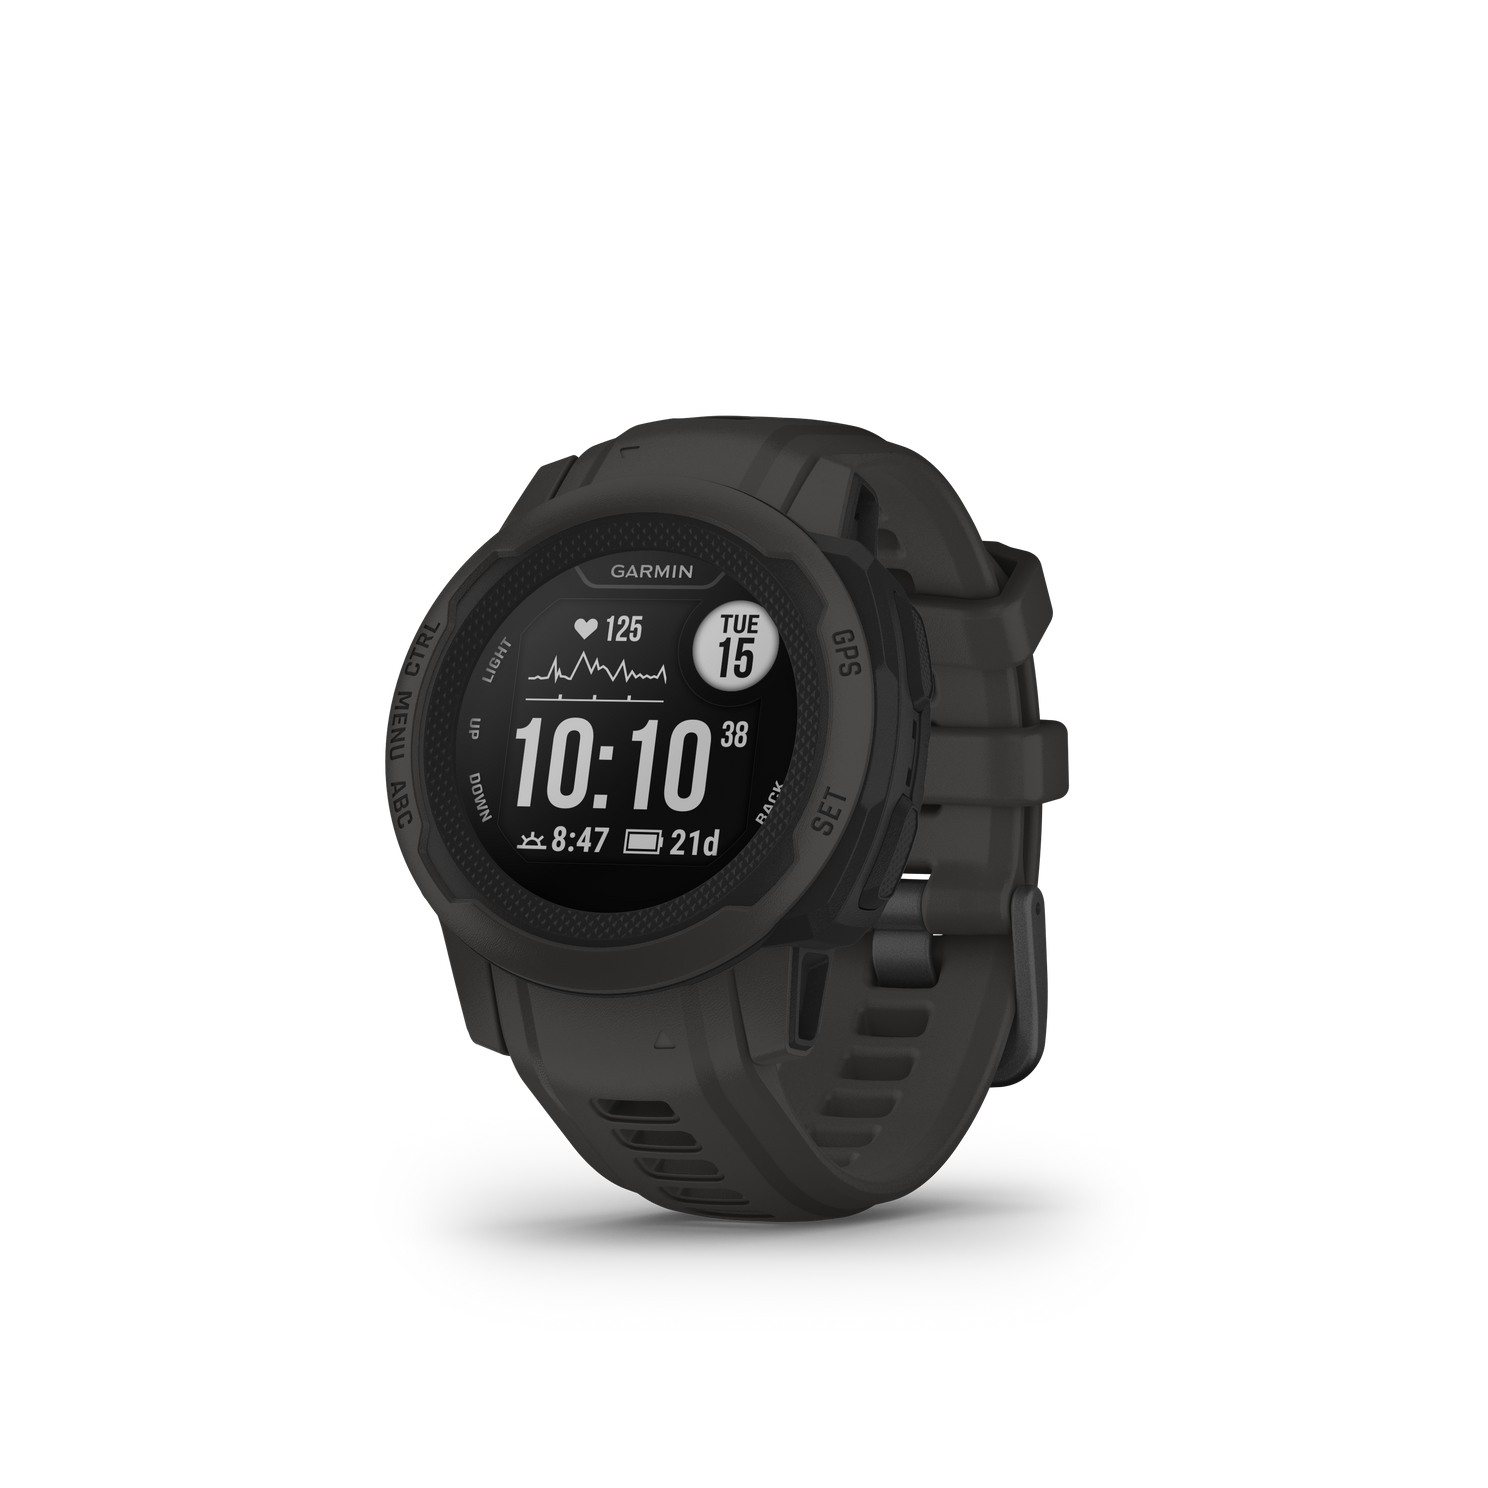 Garmin Instinct 2 official: cool smartwatches with long battery life (also for truck drivers)